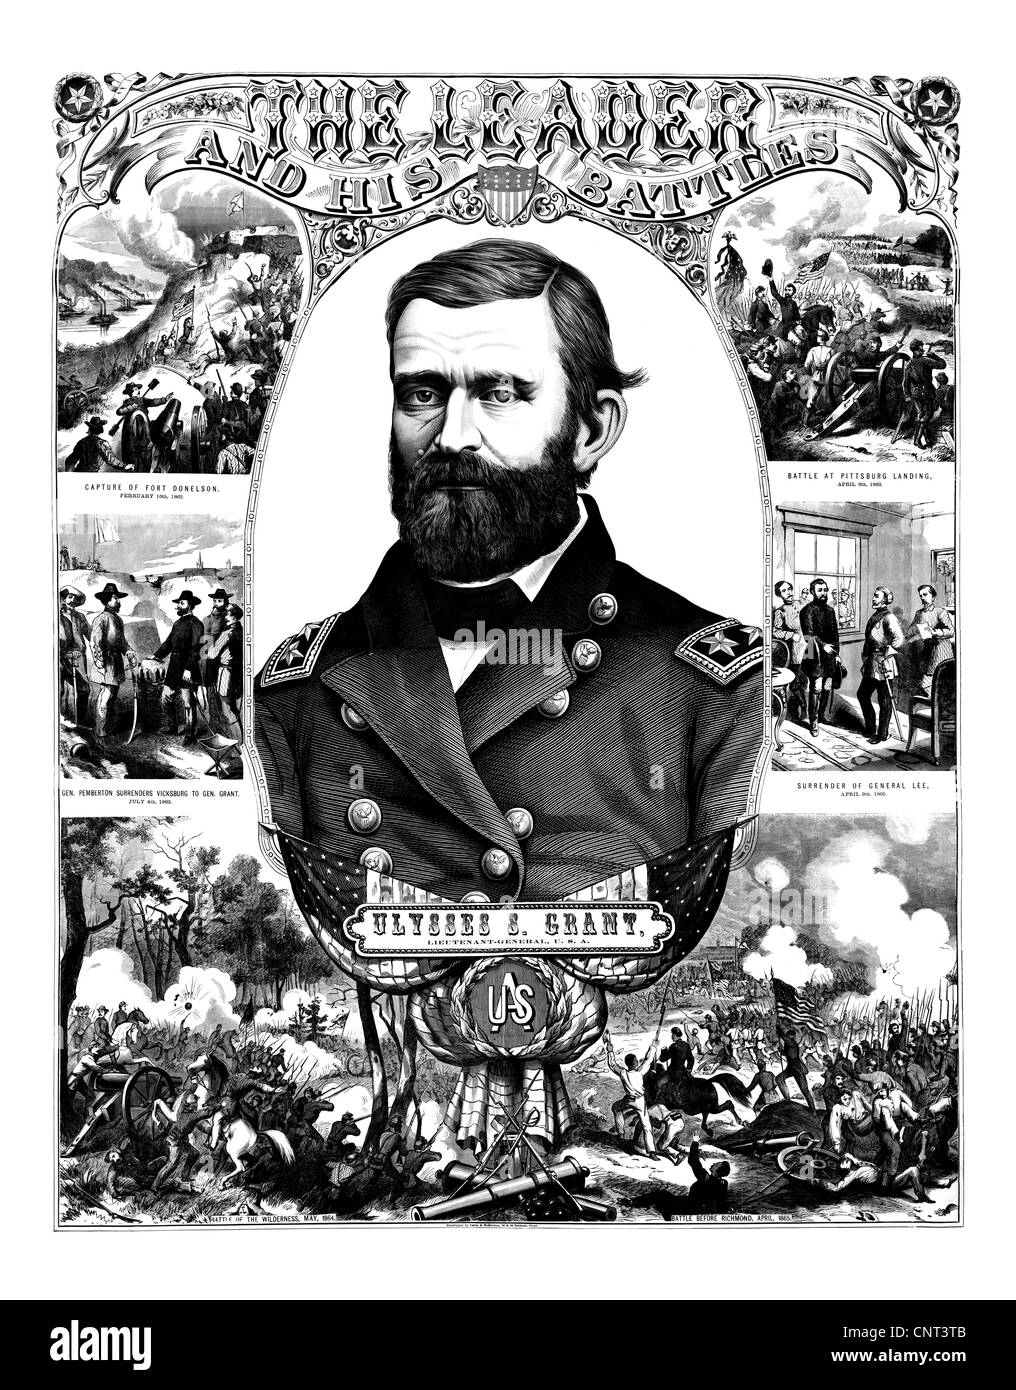 Vintage Civil War poster of General Ulysses S. Grant wearing his military uniform. Stock Photo